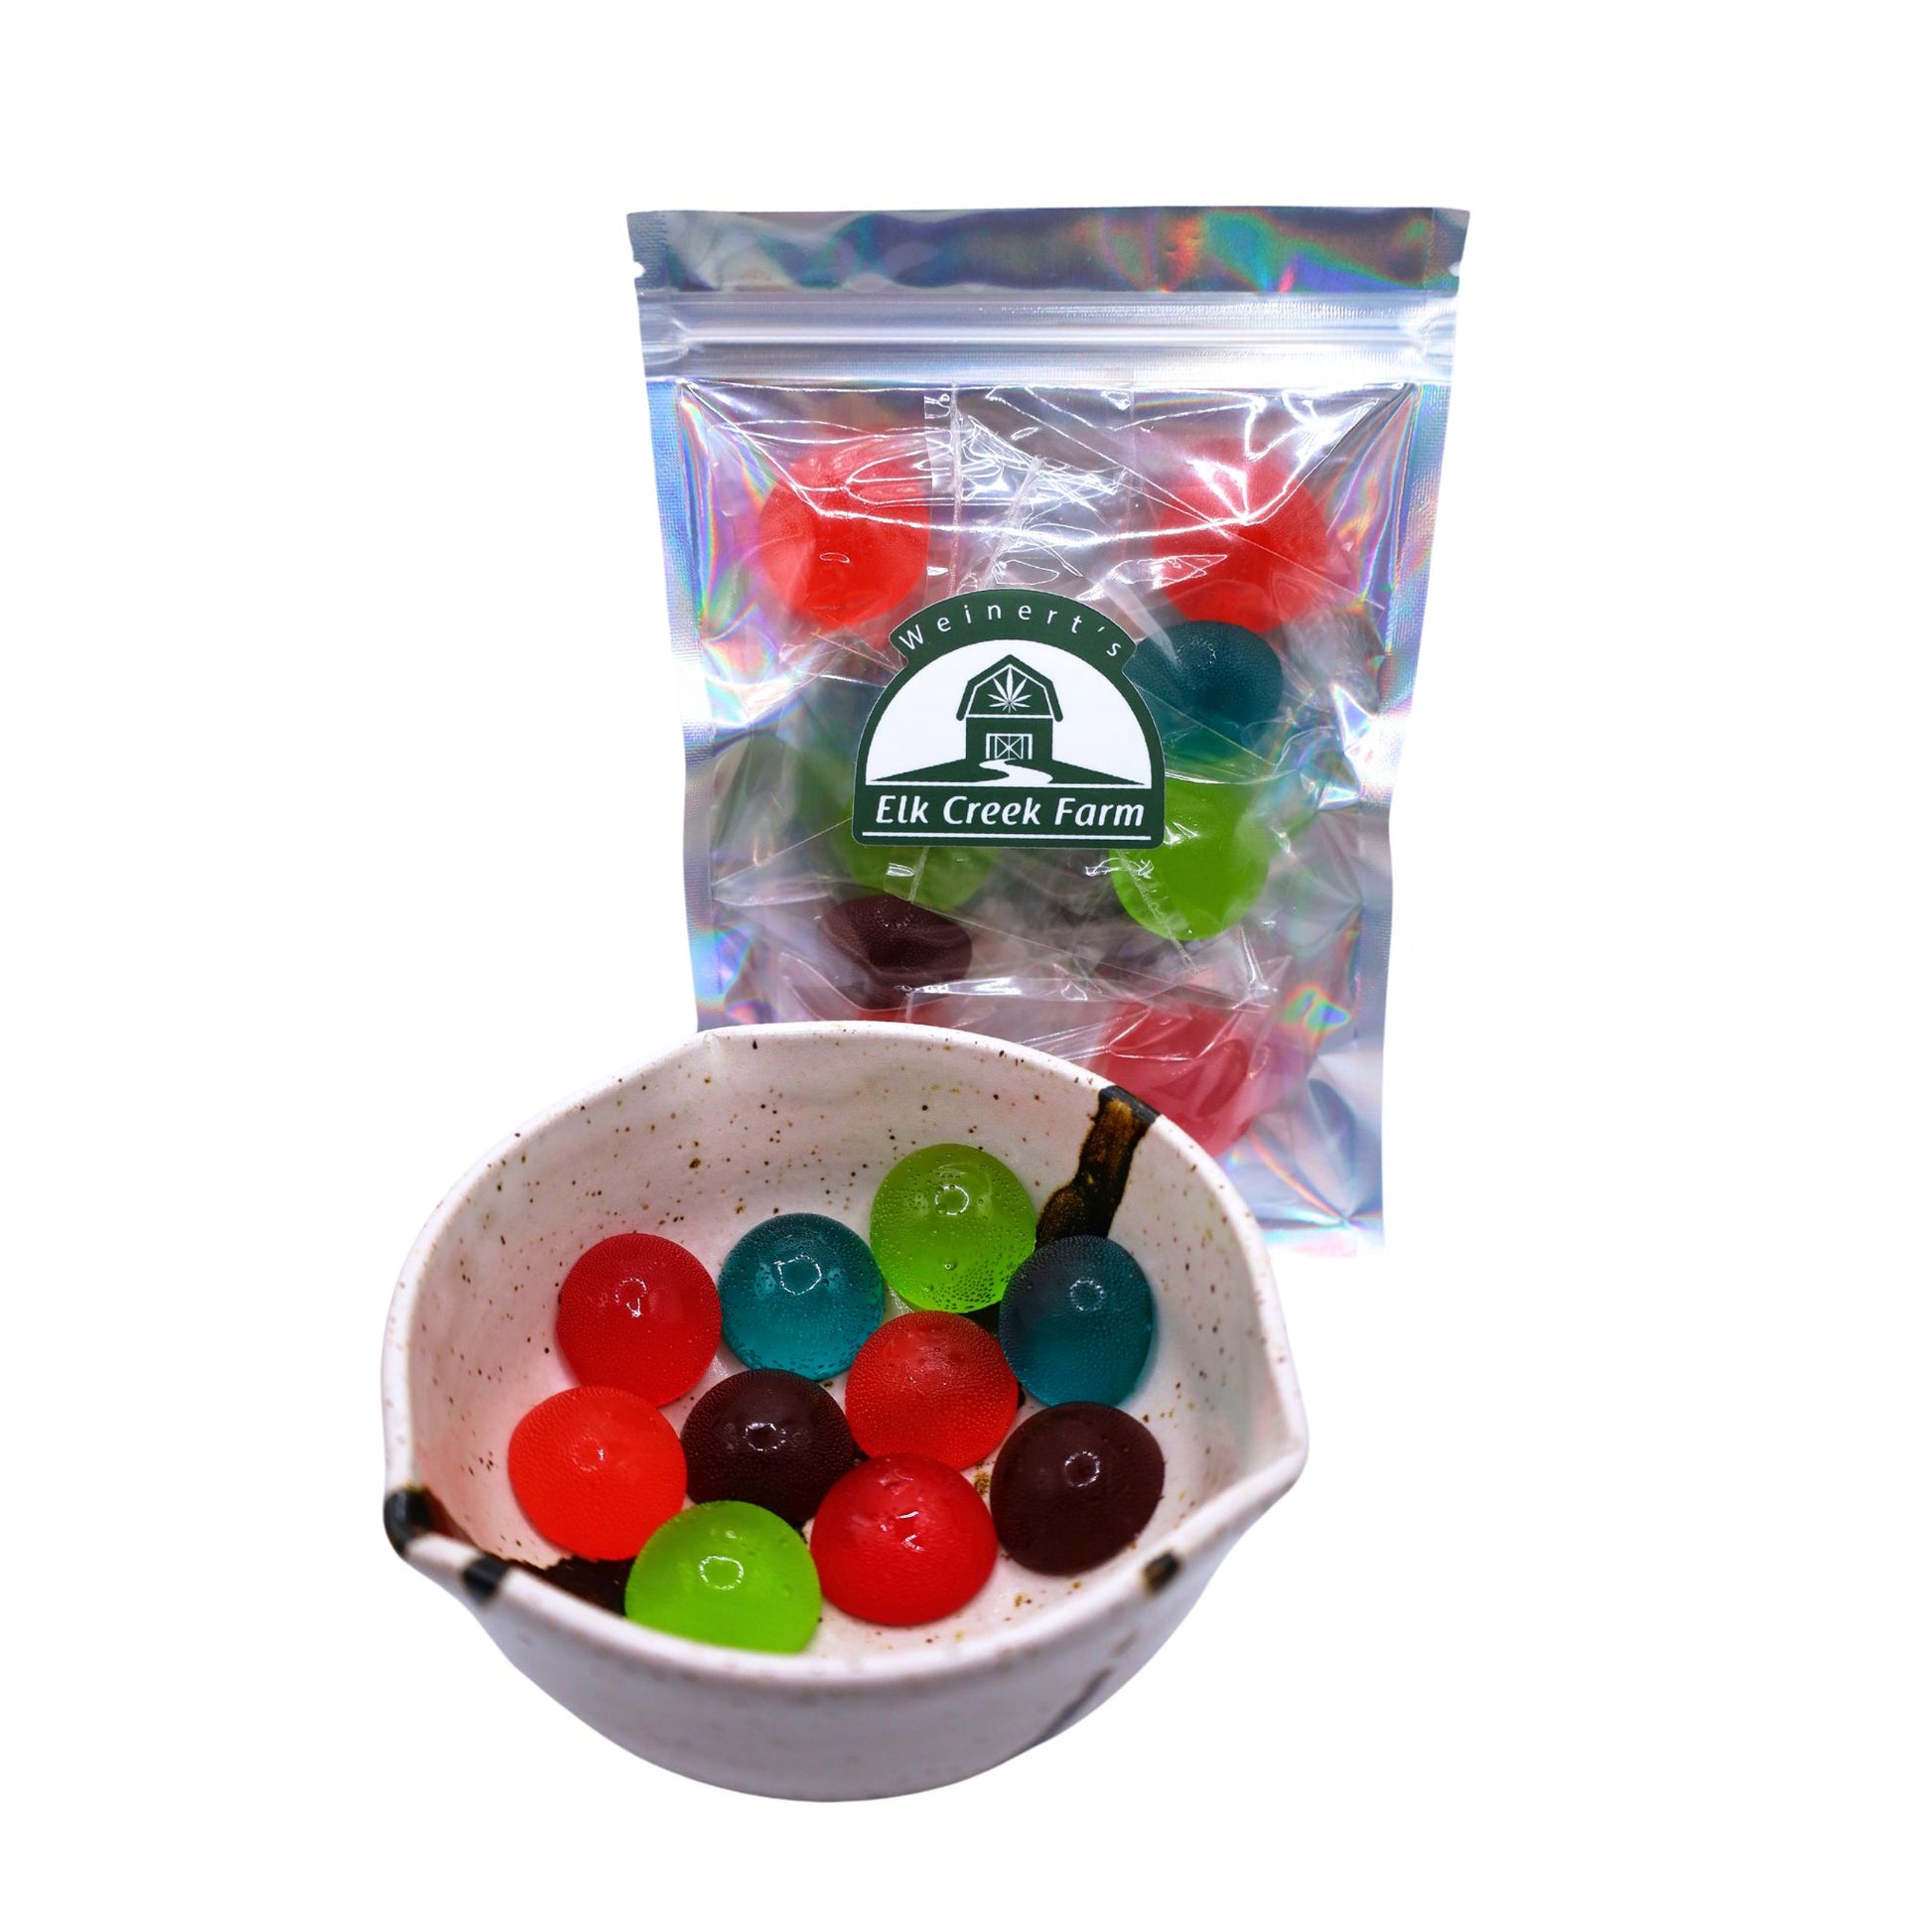 A package of premium infused CBD Hard Candies next to a bowl full of hard candy